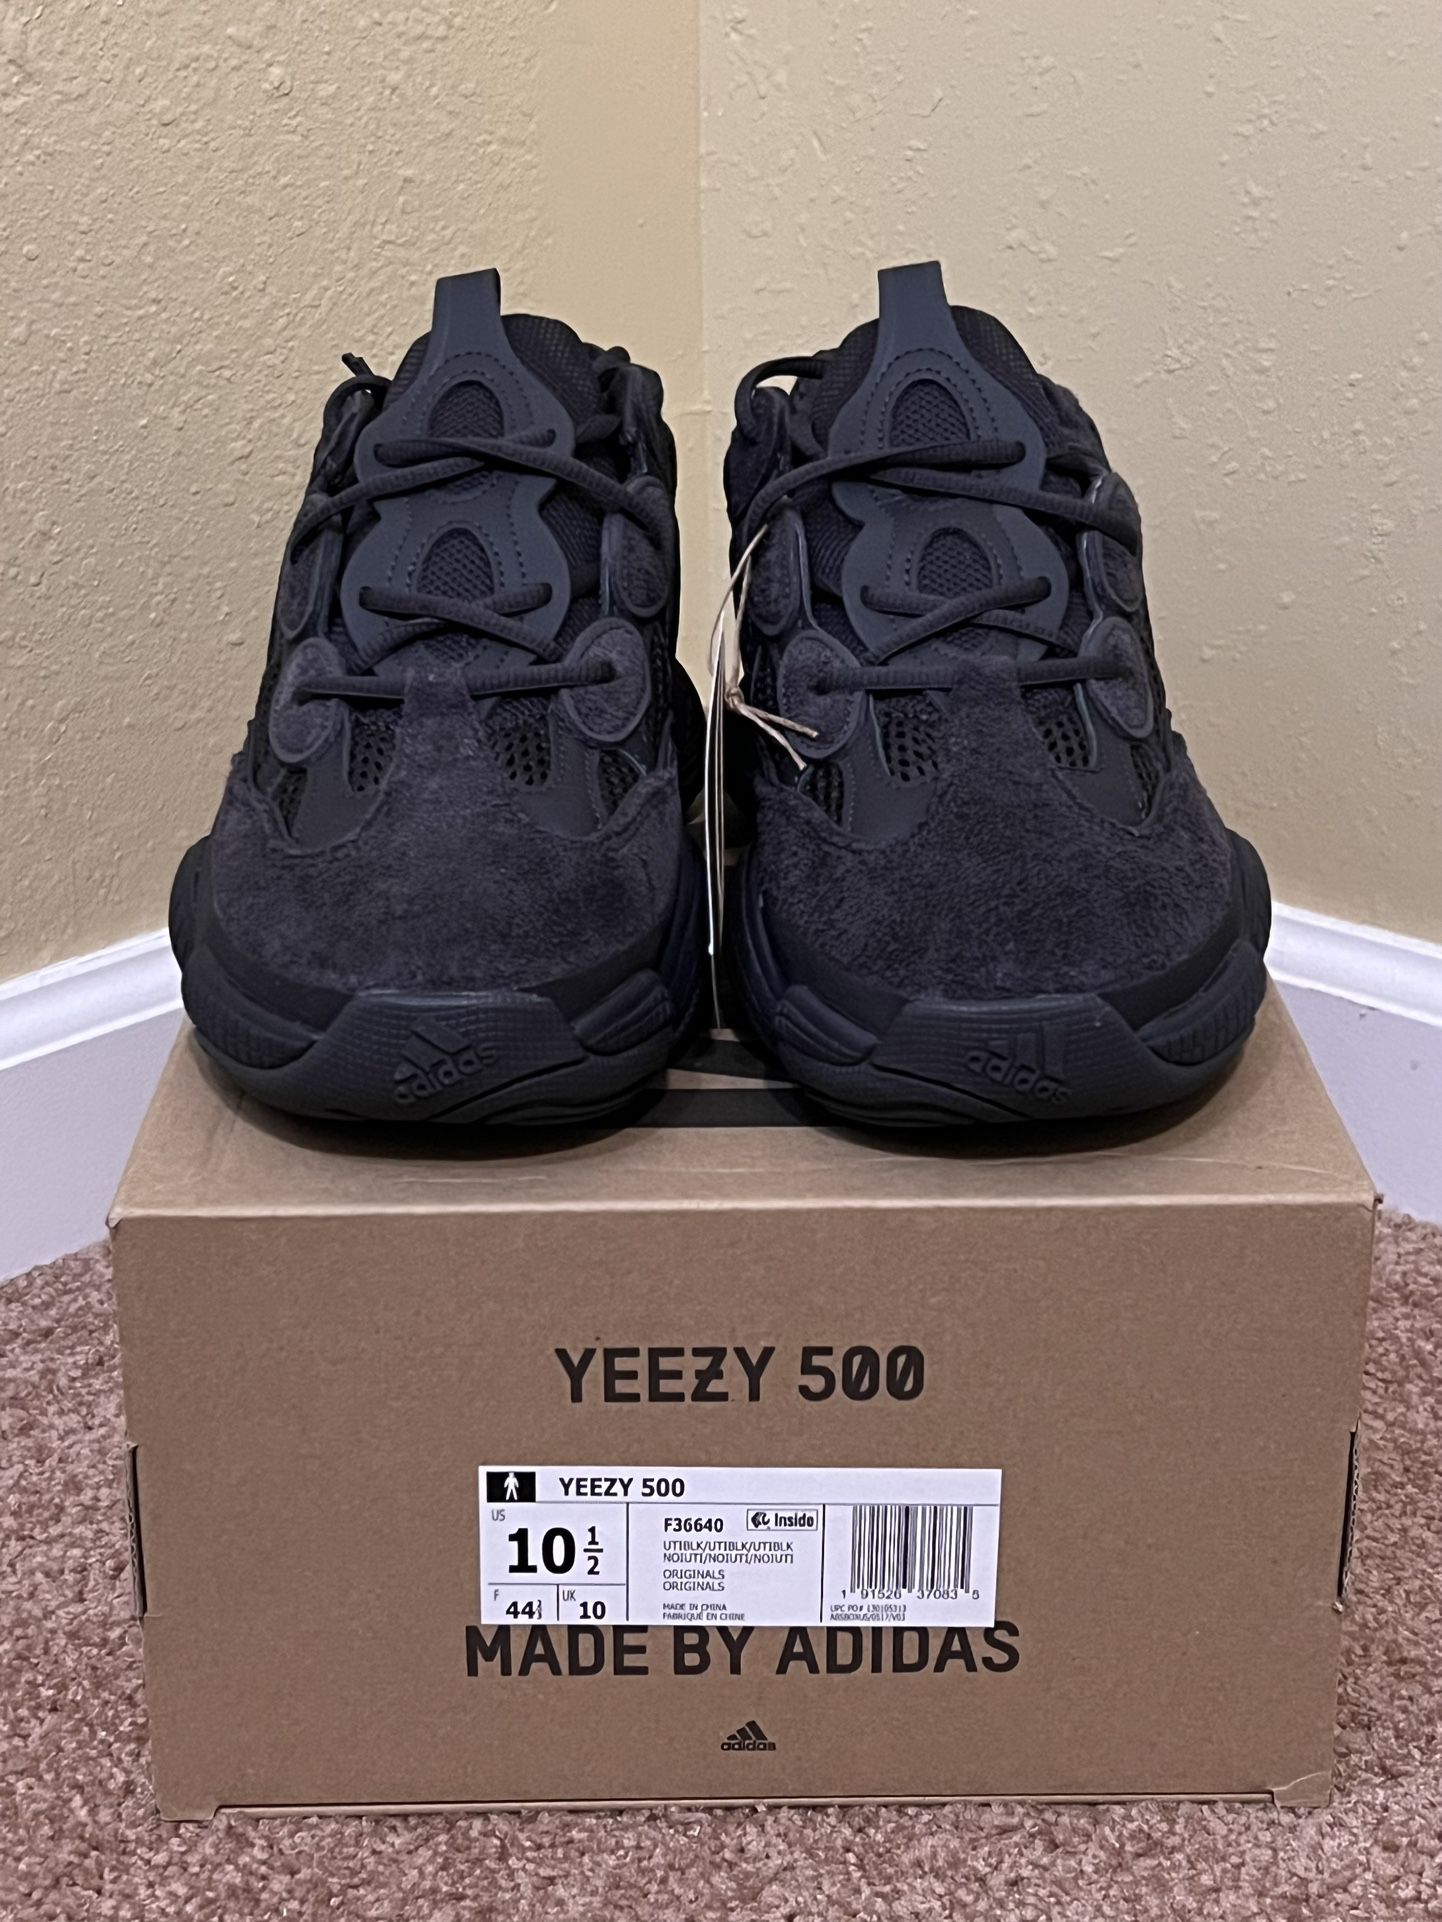 Adidas Yeezy Boost 500 Brand New Size 10.5 100% Authentic $300